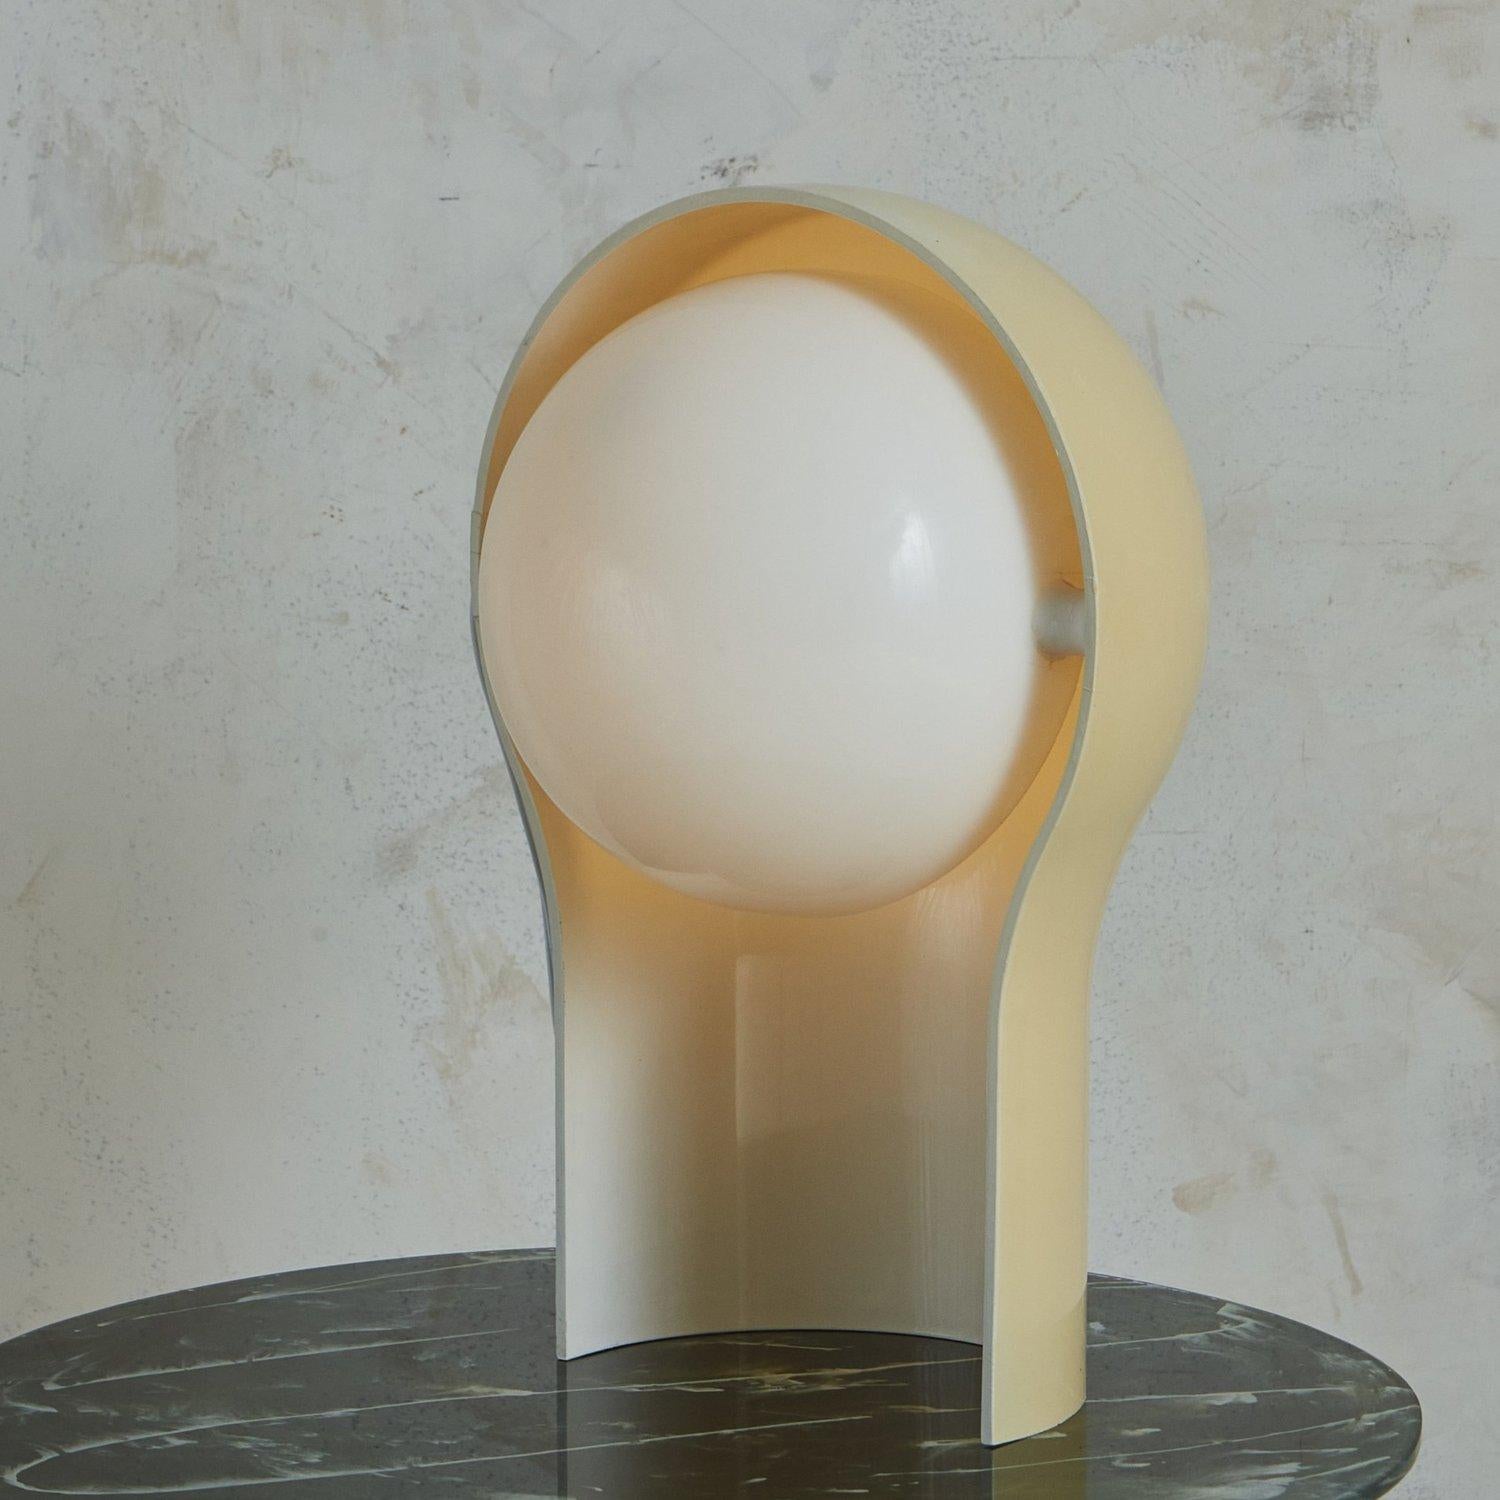 A ‘Telegono’ table lamp designed by Vico Magistretti for Artemide in the 1960s. This sculptural lamp has a curved cream acrylic base with a rotating white acrylic demilune shade. When lit, it emits a warm glow. Unmarked. Sourced in Italy, 1960s.

